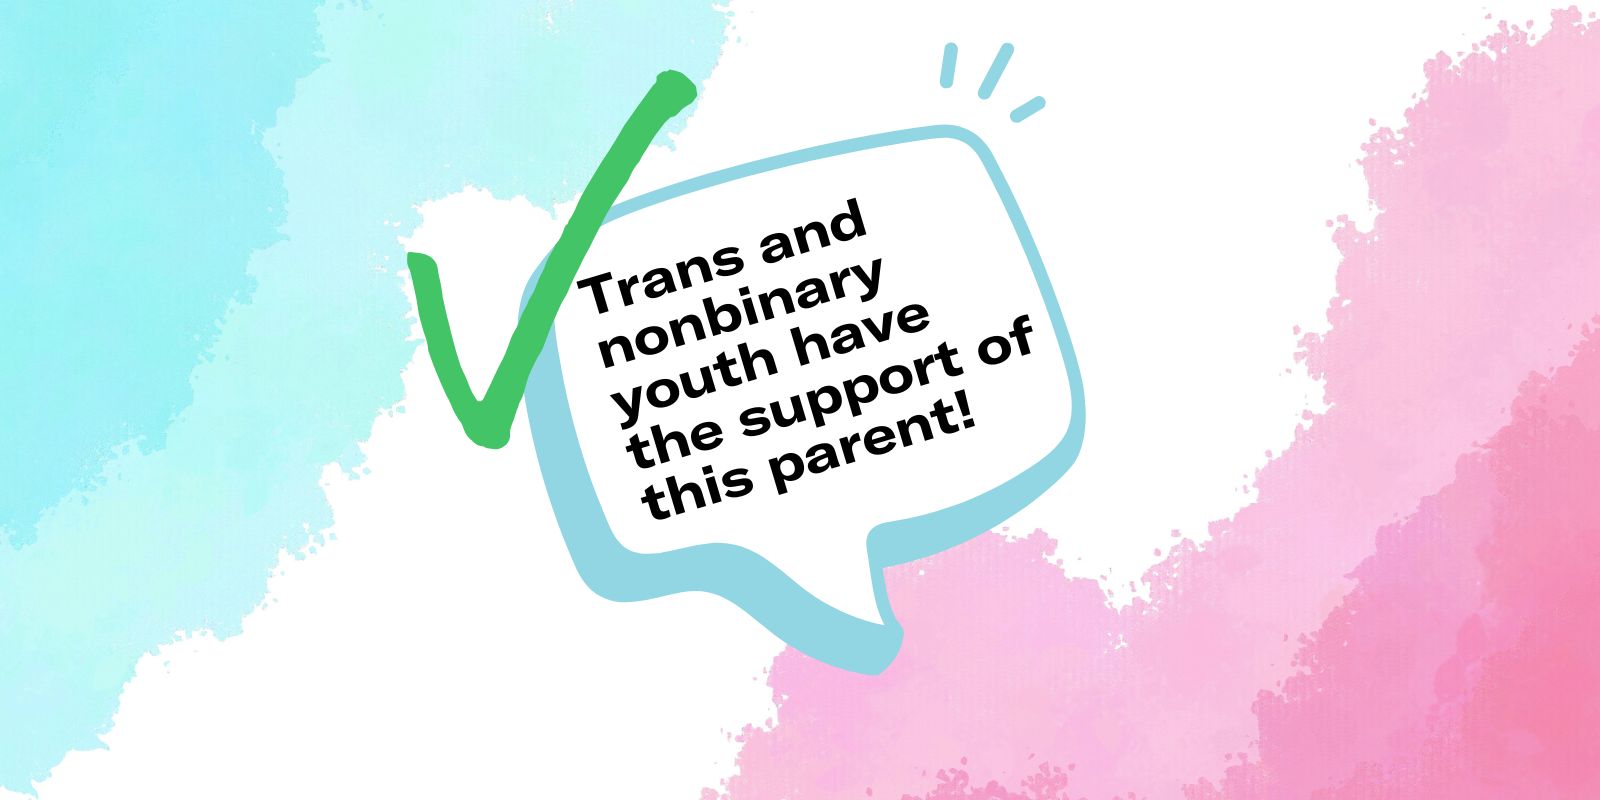 water-colored background of blue, white, pink with a dialogue box with the following text "trans and nonbinary youth have the support of this parent."